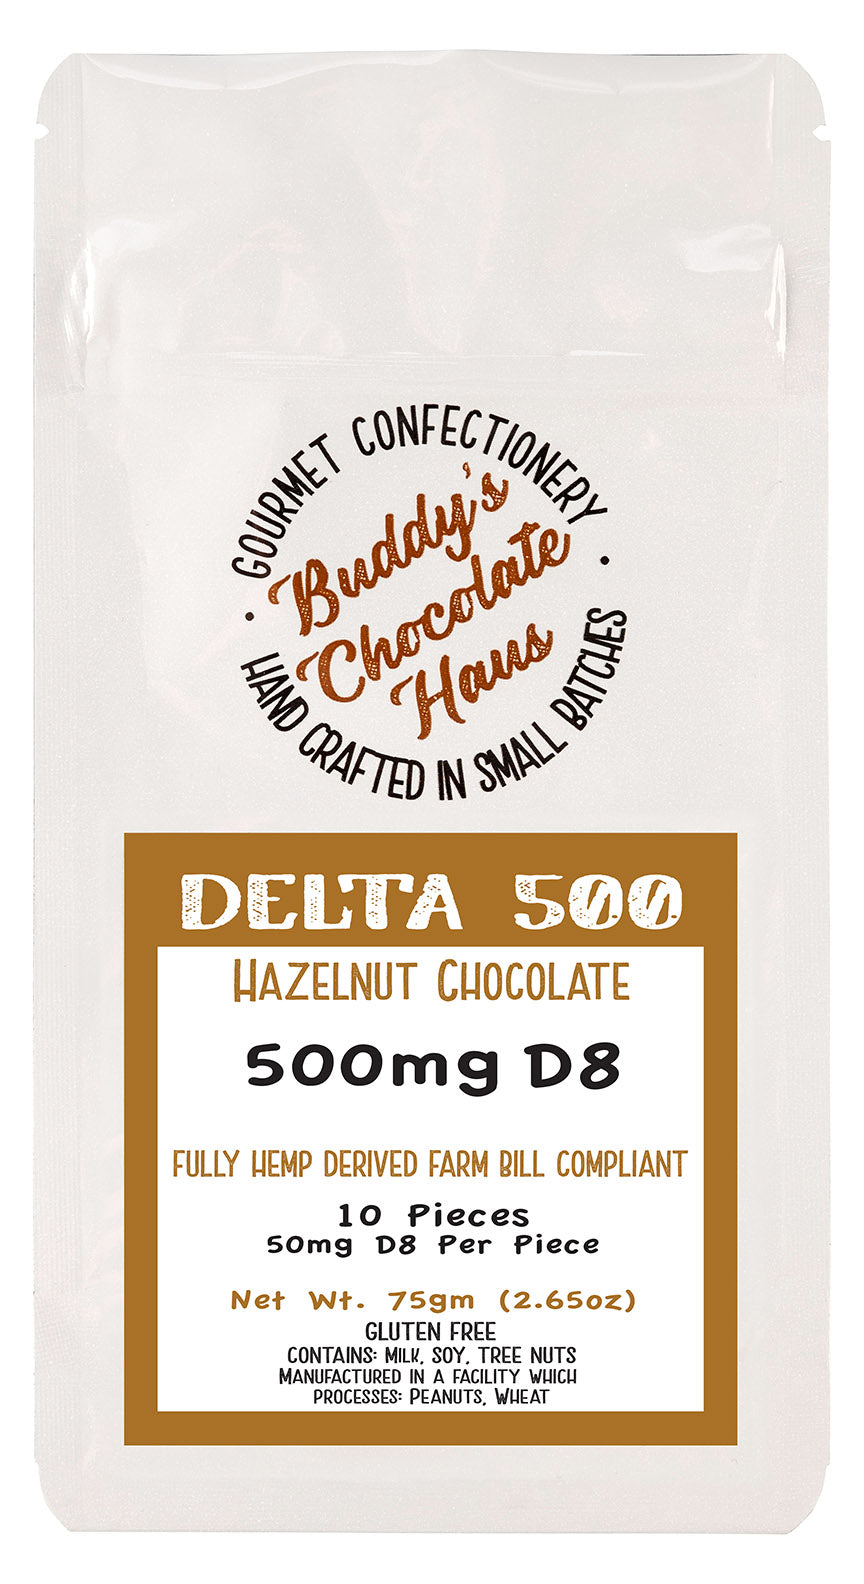 hazelnut chocolate bar infused with delta 8 (D8) derived from hemp